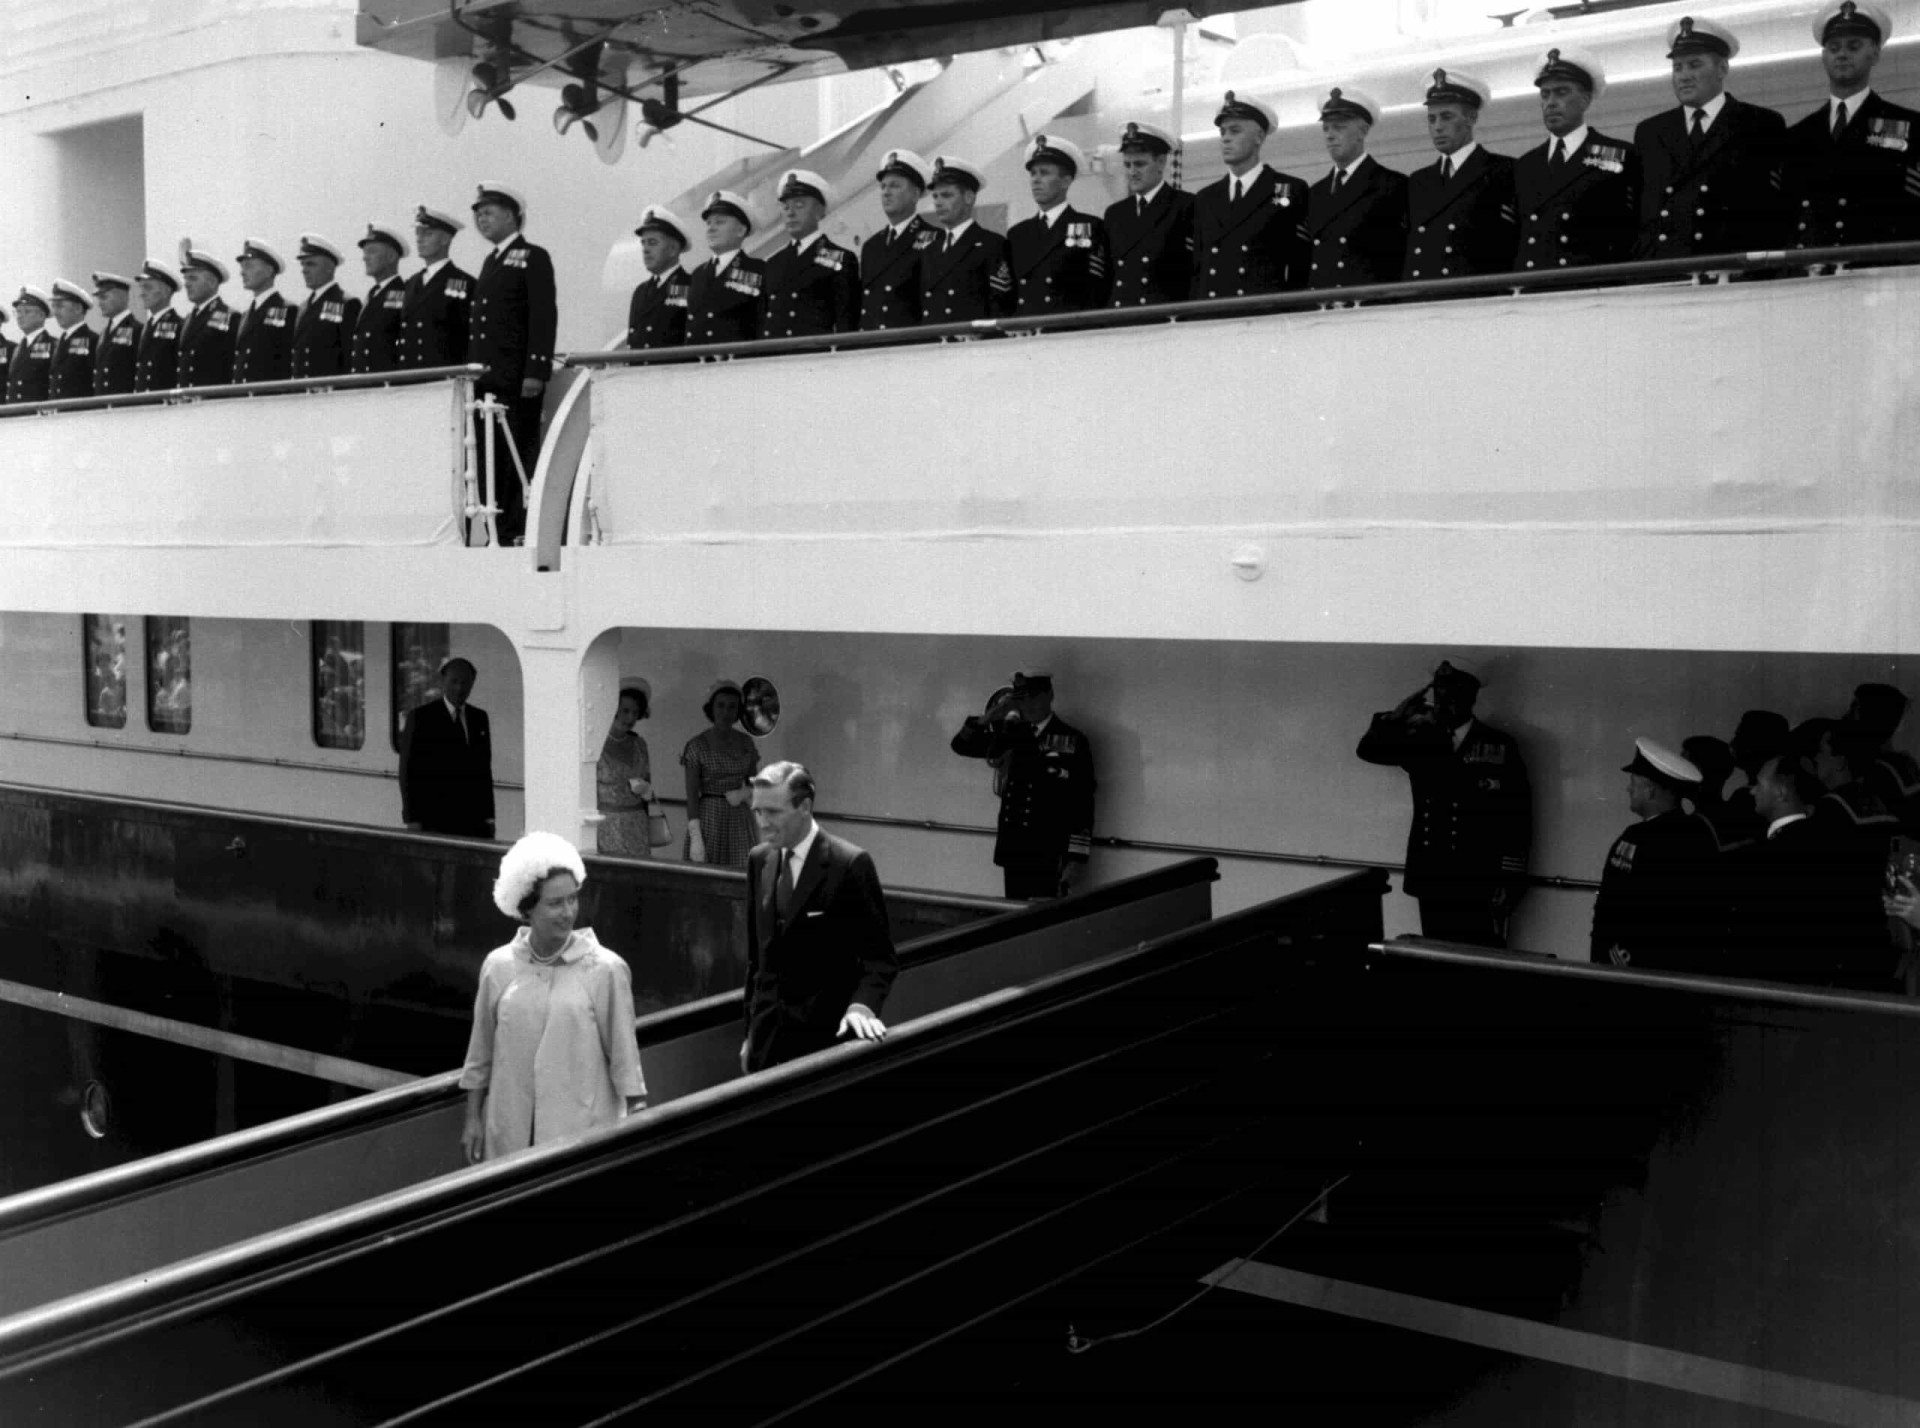 <p>HMY <em>Britannia</em> soon proved her worth as an ideal honeymoon cruise vessel. Princess Margaret and her husband, Antony Armstrong-Jones, 1st Earl of Snowdon, were the first royal couple to enjoy their honeymoon at sea, in 1960. Their voyage started a tradition where the yacht could access secluded locations away from the world's press to provide just-married British royalty with the privacy they desired.</p><p><a href="https://www.msn.com/en-sg/community/channel/vid-7xx8mnucu55yw63we9va2gwr7uihbxwc68fxqp25x6tg4ftibpra?cvid=94631541bc0f4f89bfd59158d696ad7e">Follow us and access great exclusive content every day</a></p>